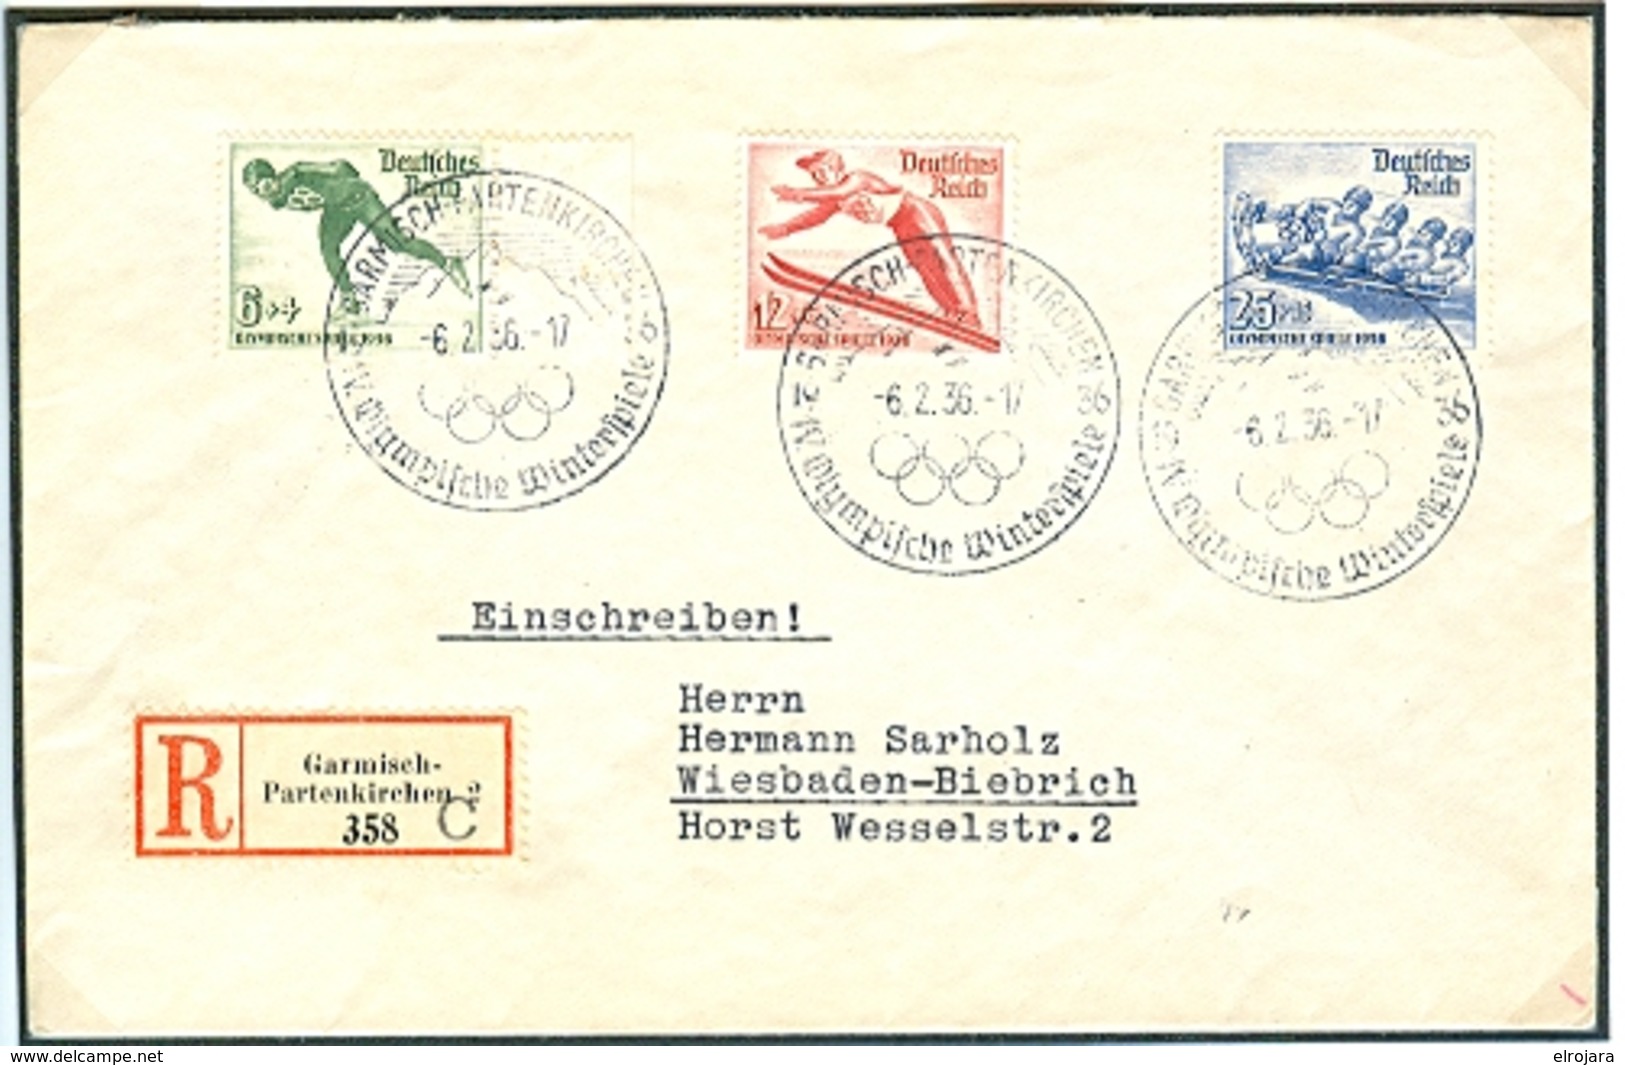 GERMANY Registered Letter With The Complete Set With R Label With C And Olympic Cancel Of The Opening Day 6.2.36 17 - Invierno 1936: Garmisch-Partenkirchen